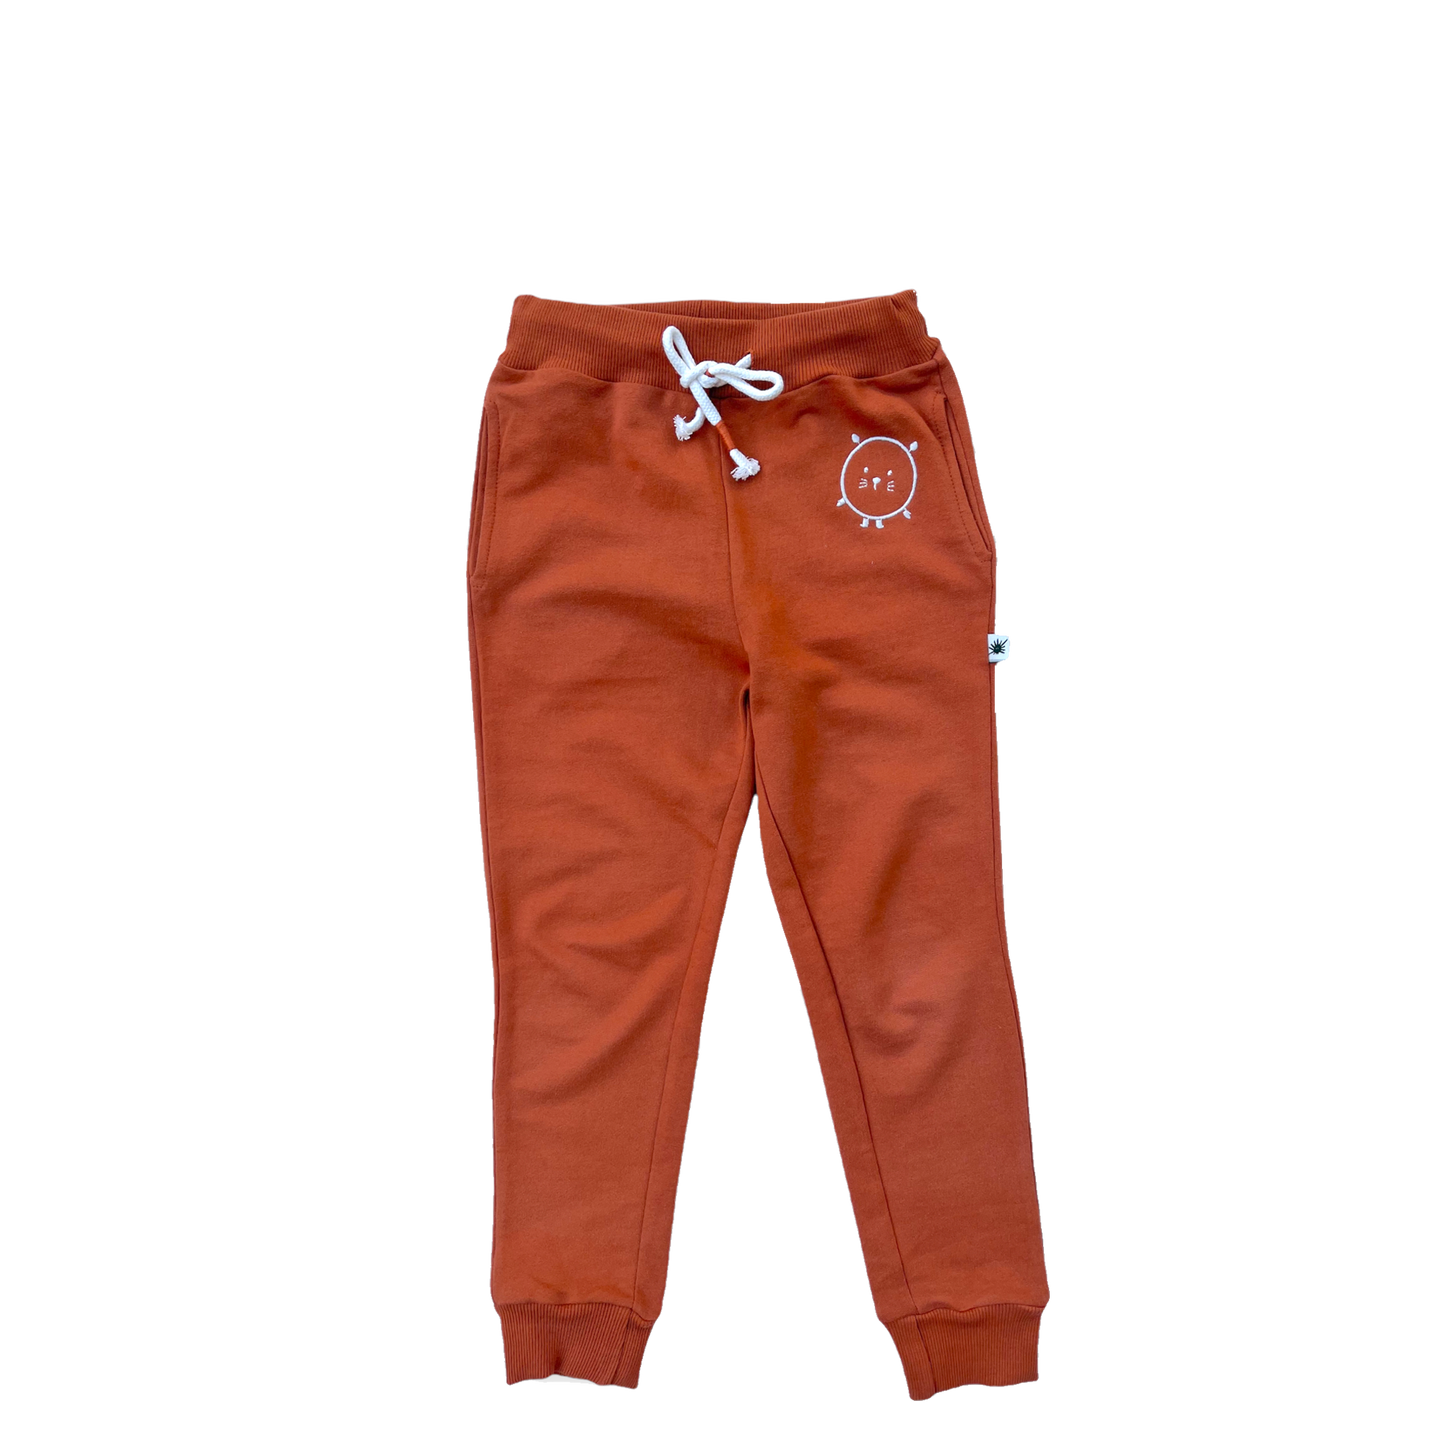 Organic "Jogger" Pants -Aged 6m to 9 Yrs- Colored Rust